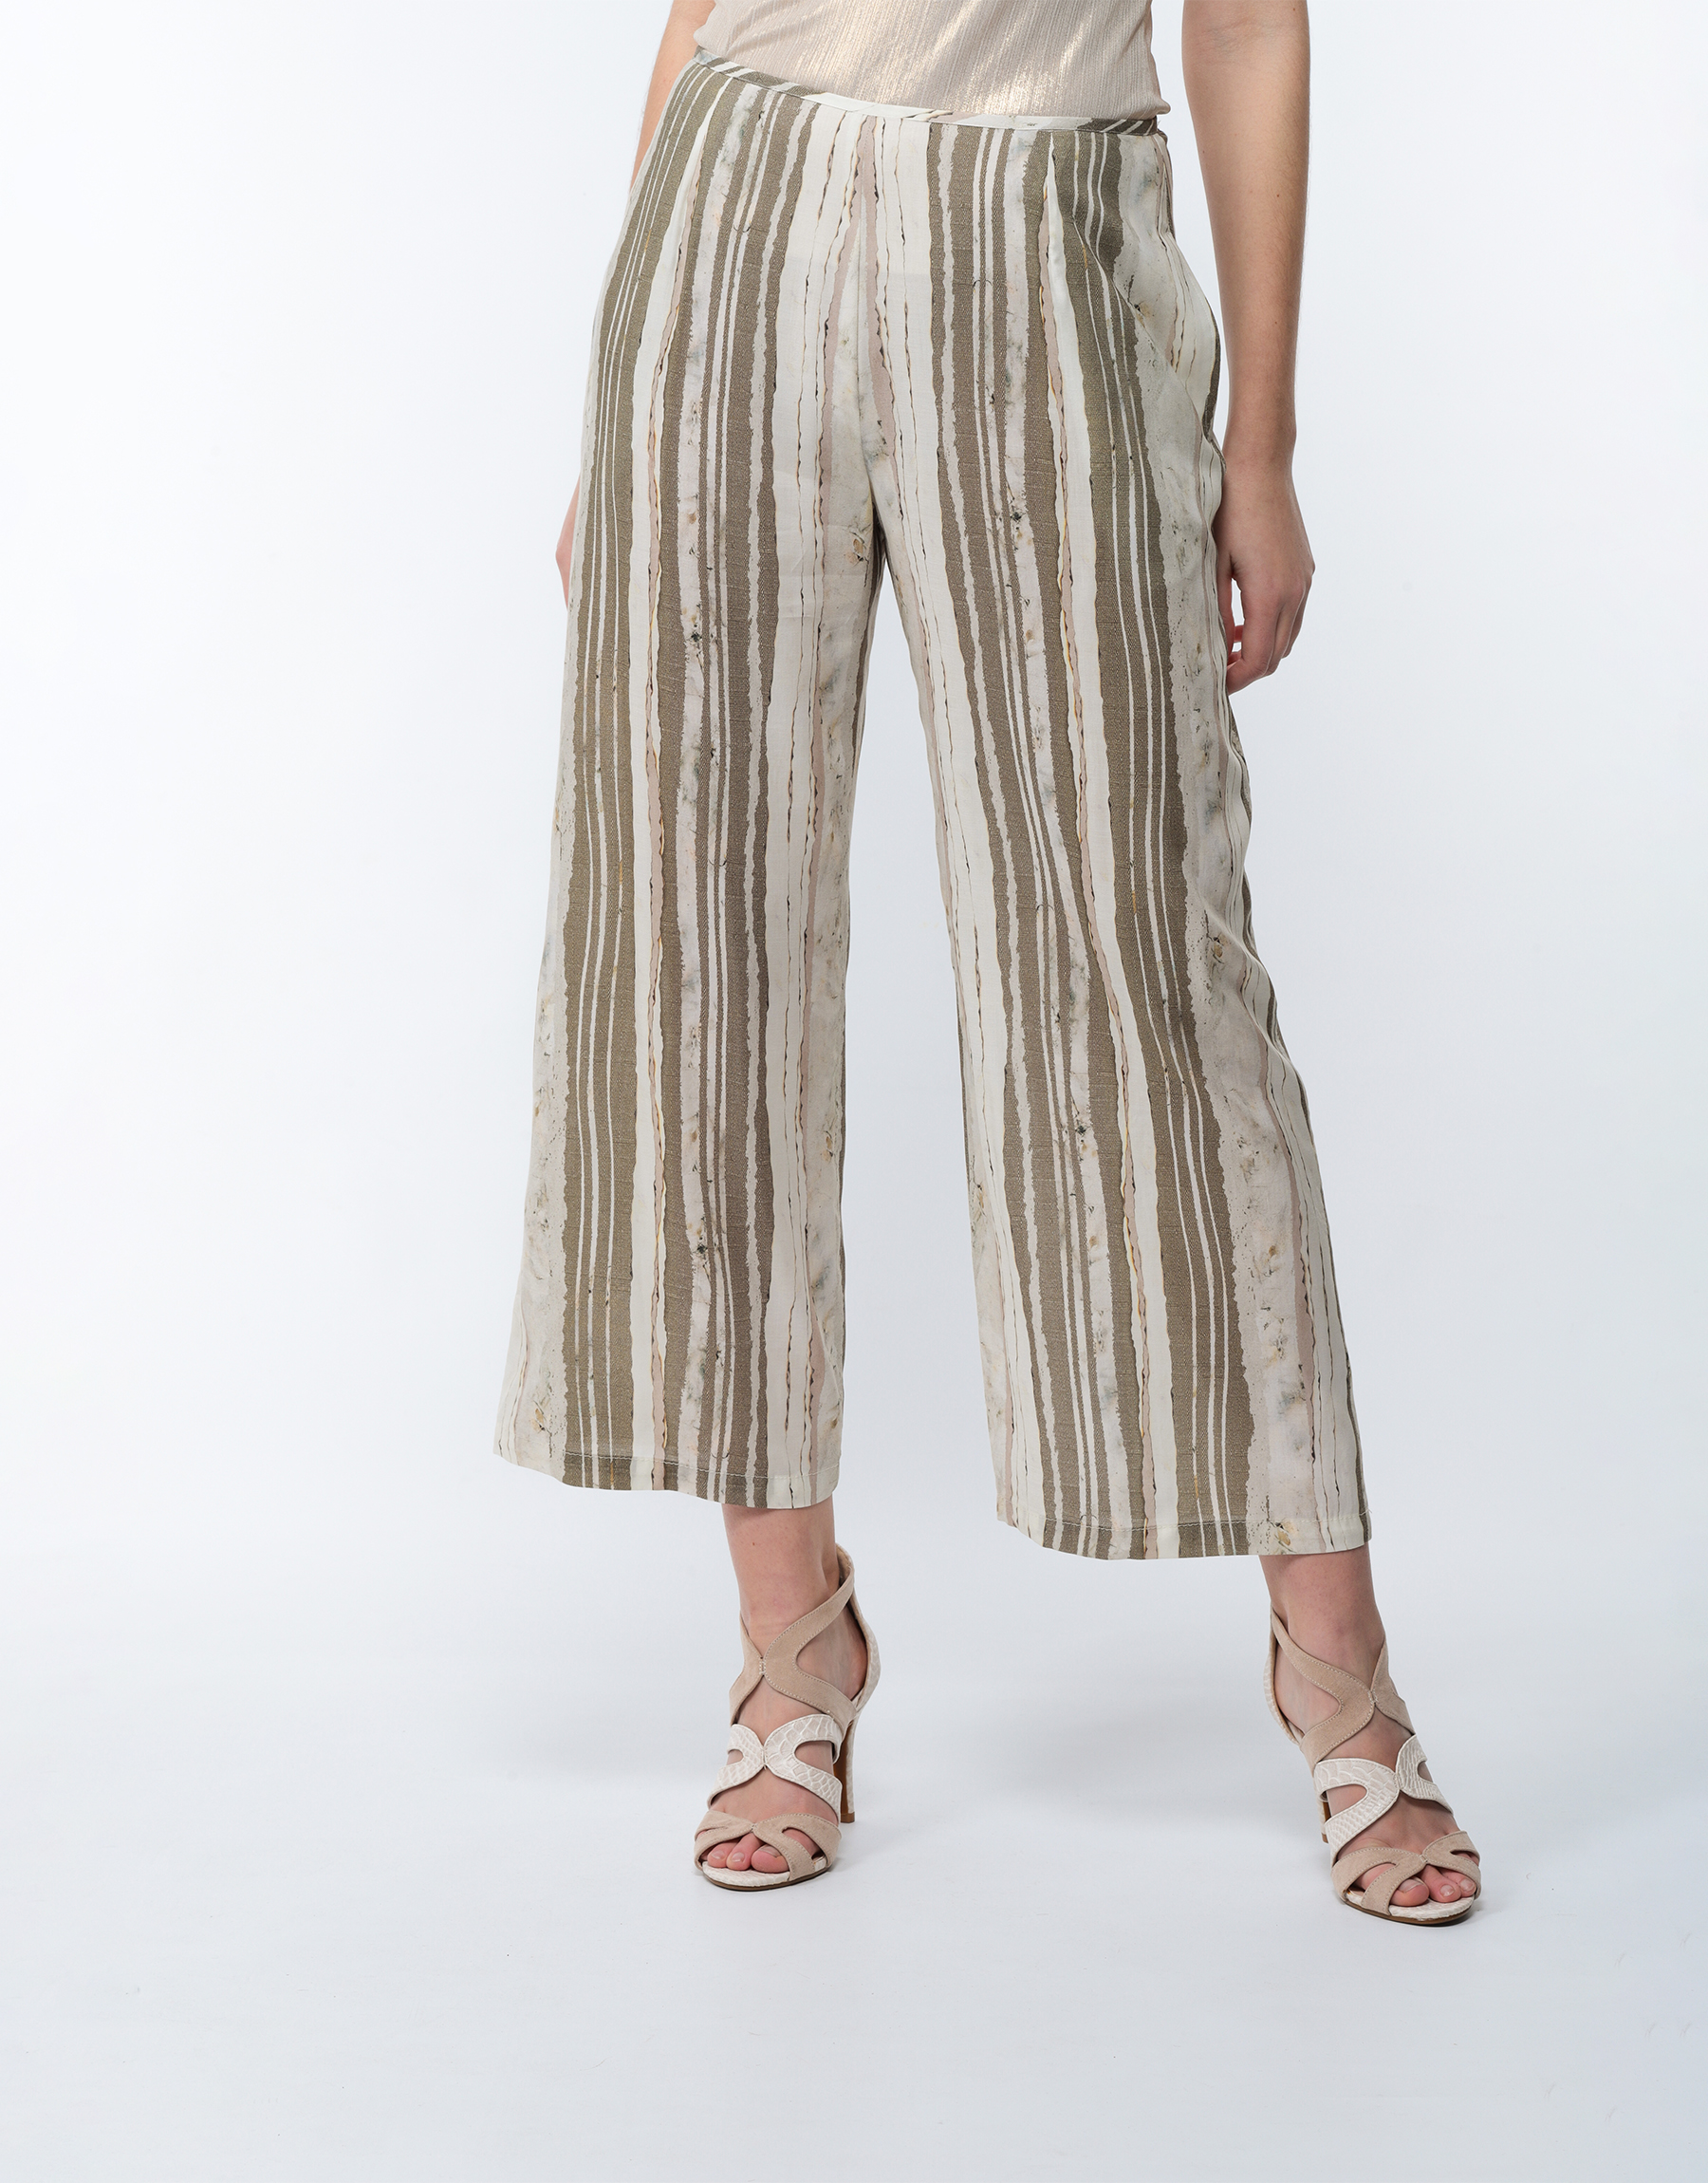 Summer trousers 7/8 in viscose and silk printed striped khaki and ivory 